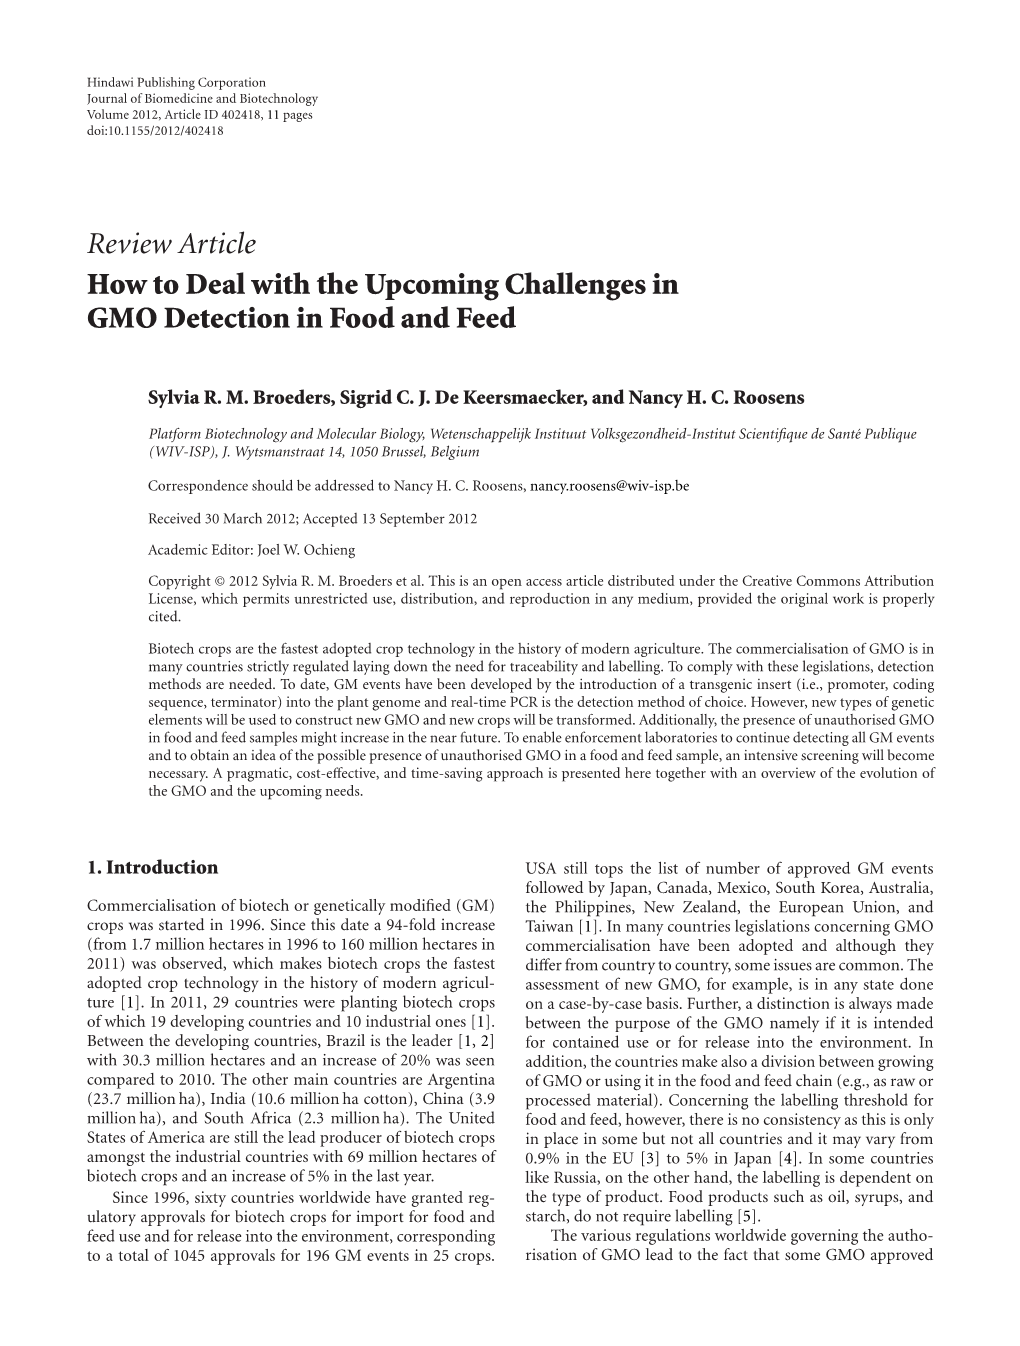 Review Article How to Deal with the Upcoming Challenges in GMO Detection in Food and Feed